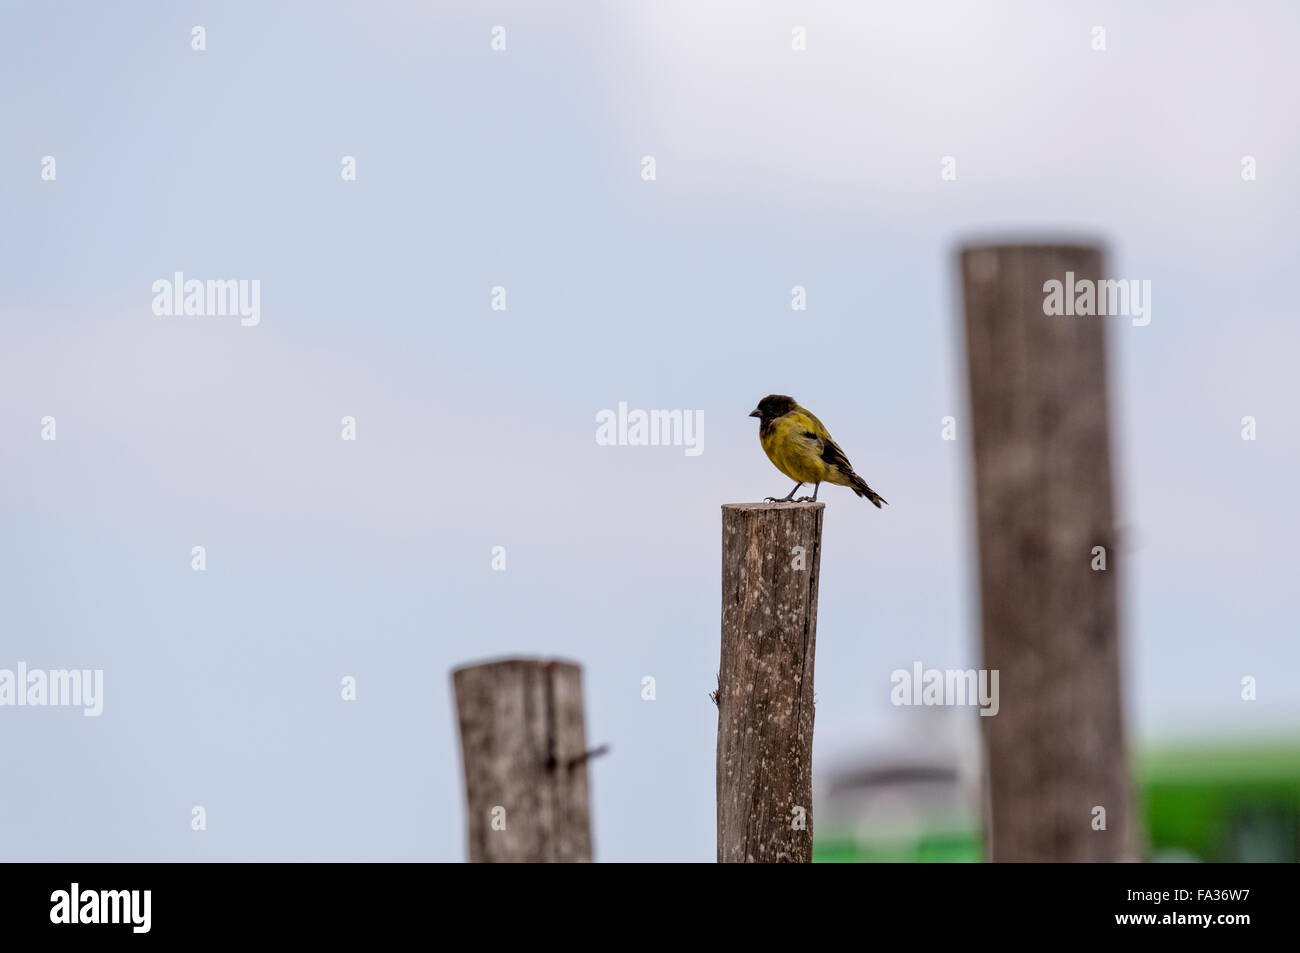 A Baglafecht Weaver perched on a post in Ethiopia's Jemma Valley Stock Photo